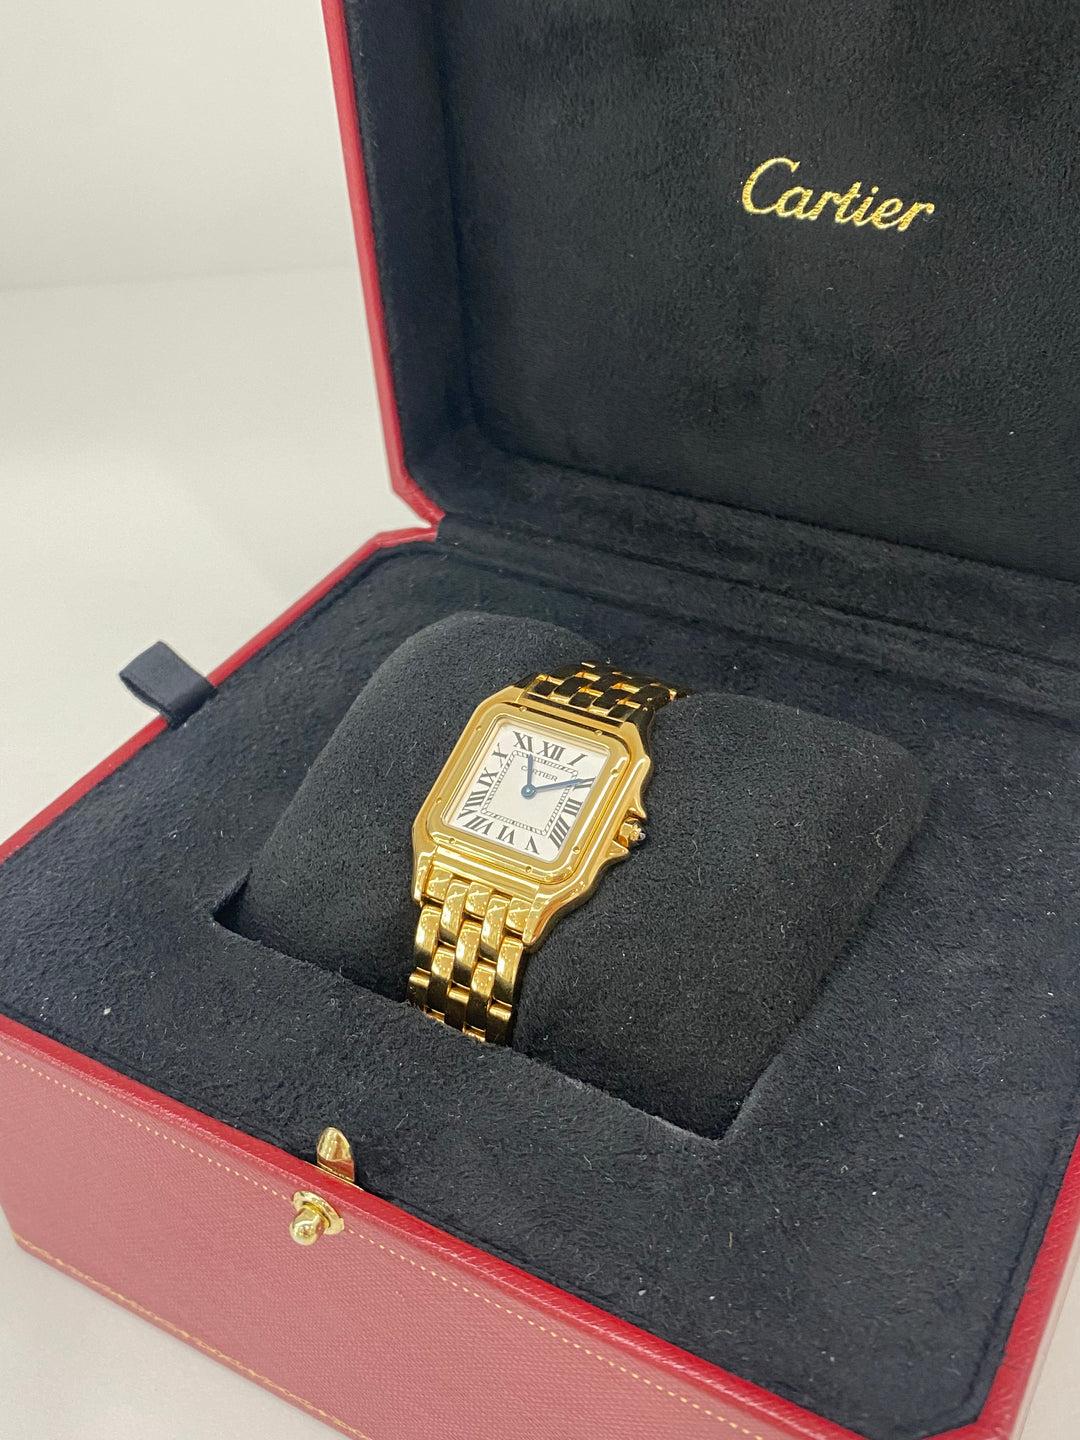 Cartier Panthere Watch Yellow Gold - Medium In Excellent Condition For Sale In Double Bay, AU